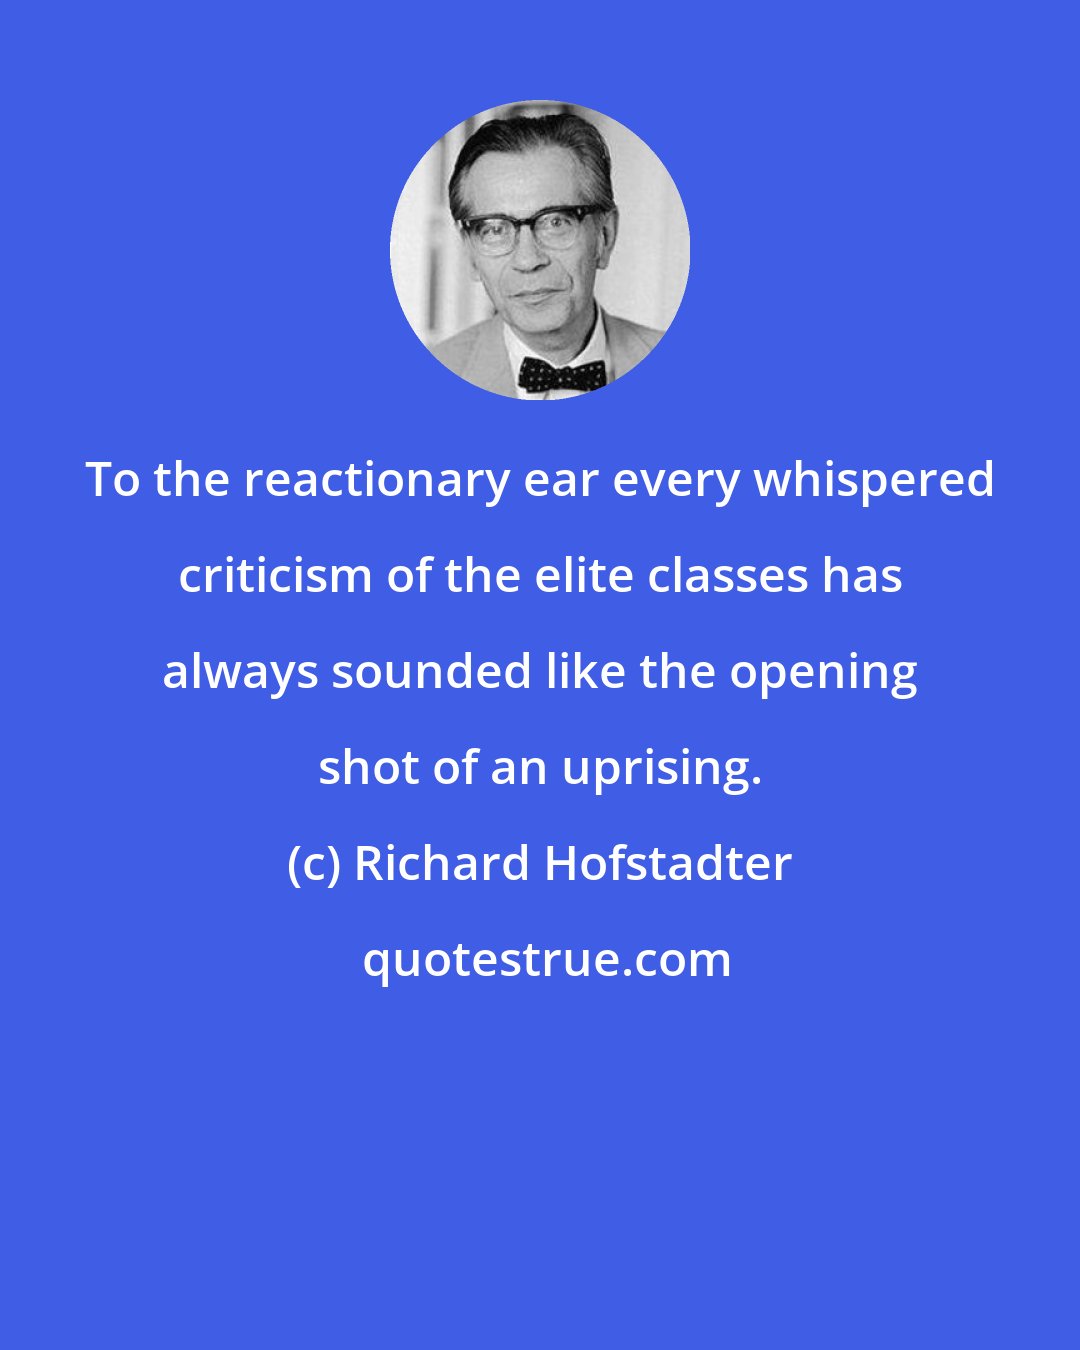 Richard Hofstadter: To the reactionary ear every whispered criticism of the elite classes has always sounded like the opening shot of an uprising.